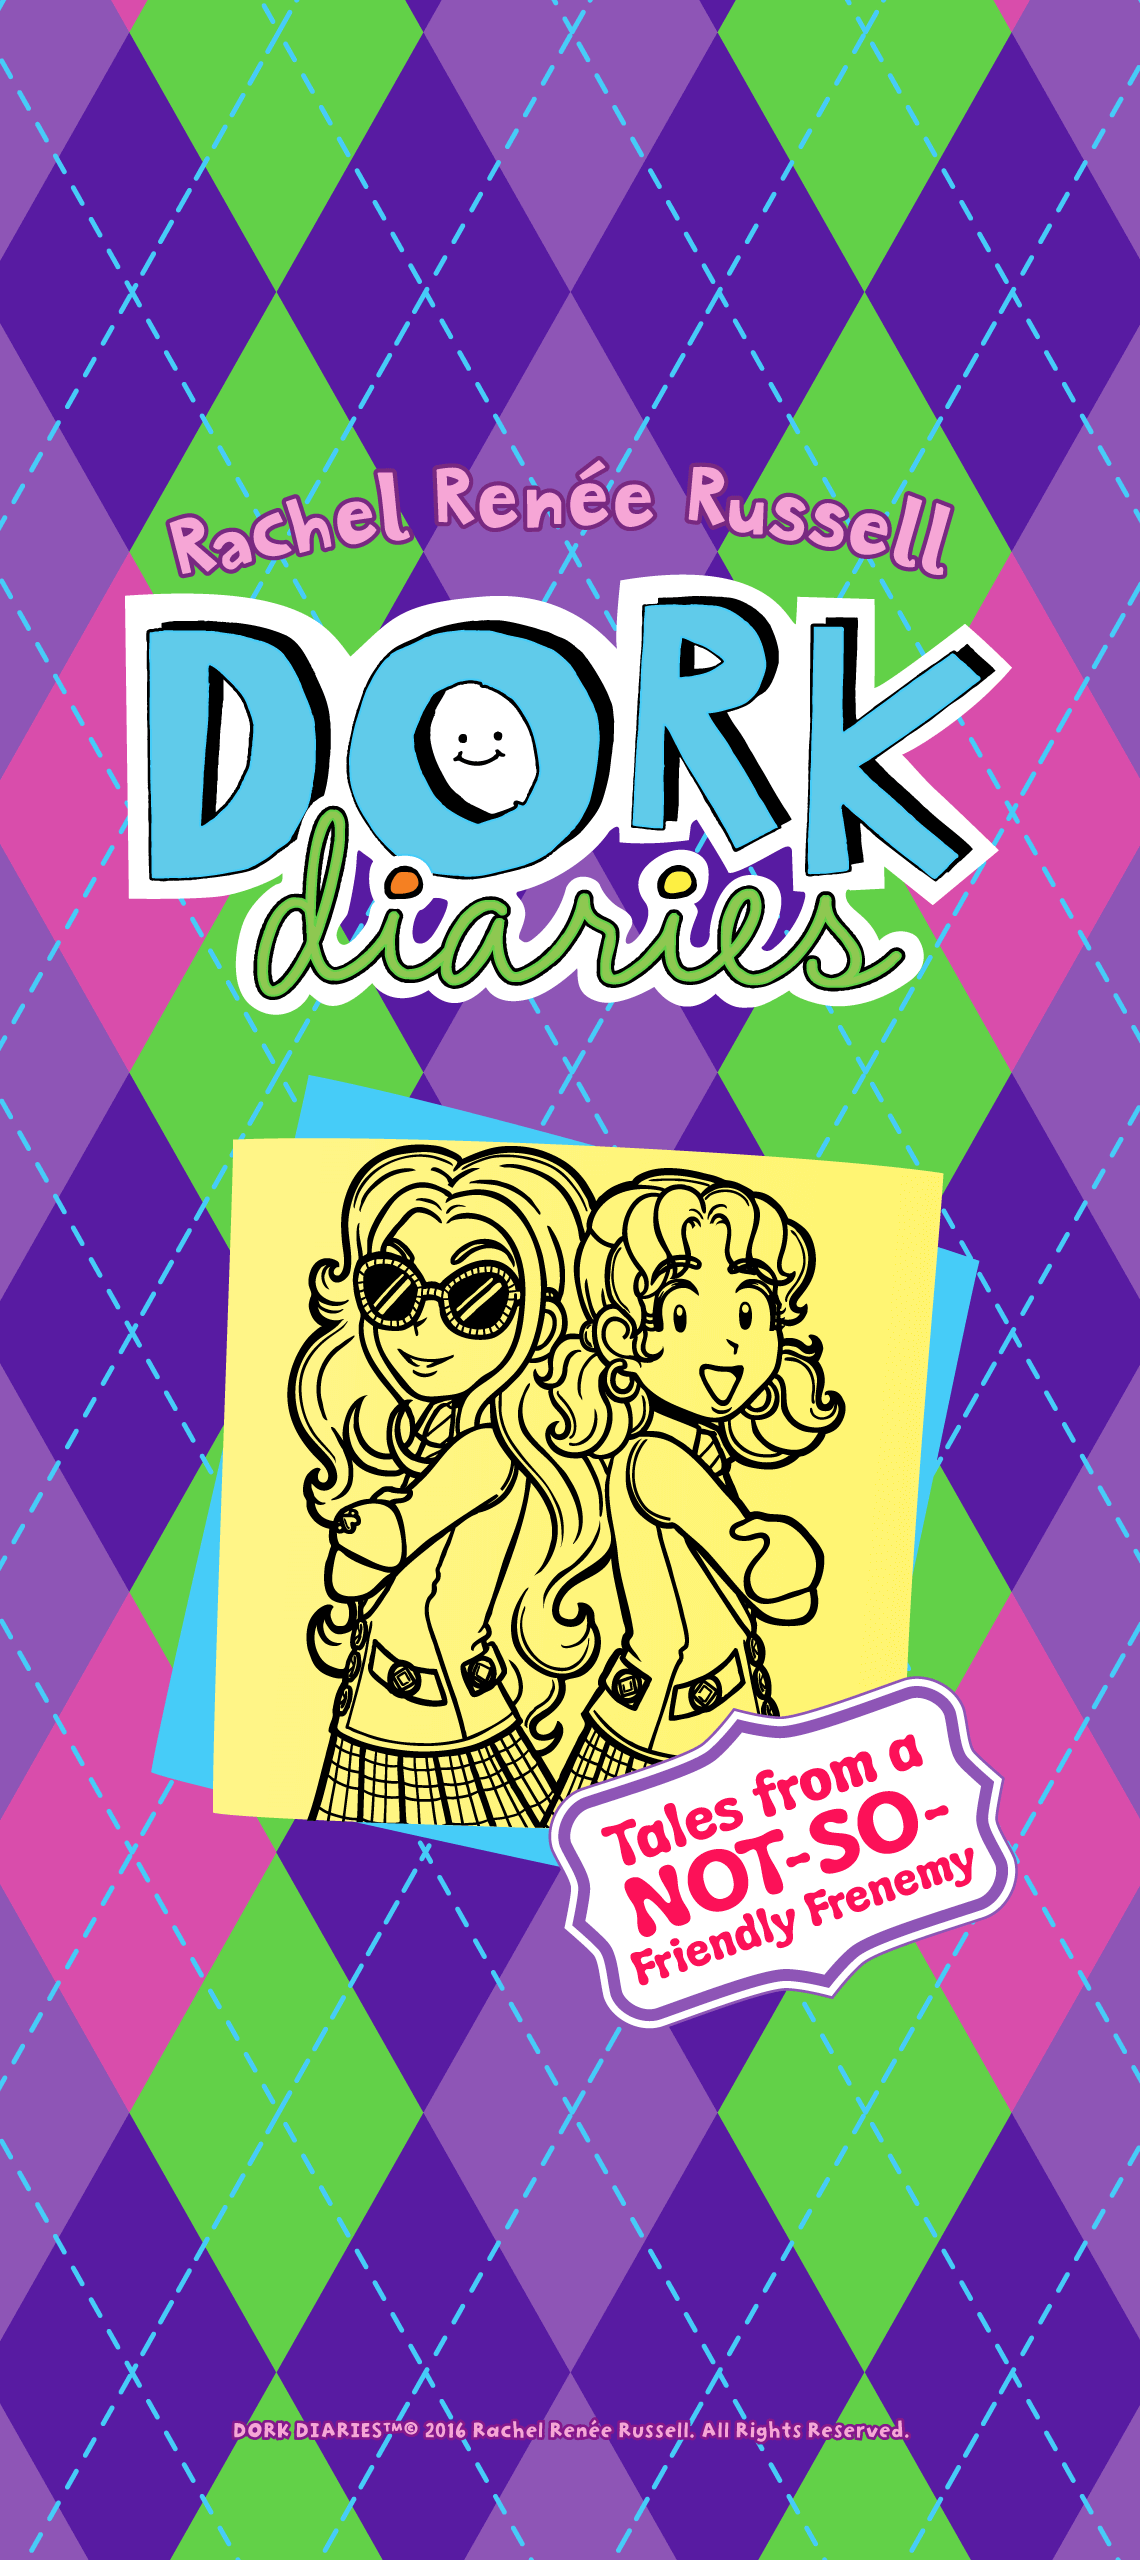 Tales from a Not-So-Friendly Frenemy – Wallpaper – Dork Diaries1140 x 2560